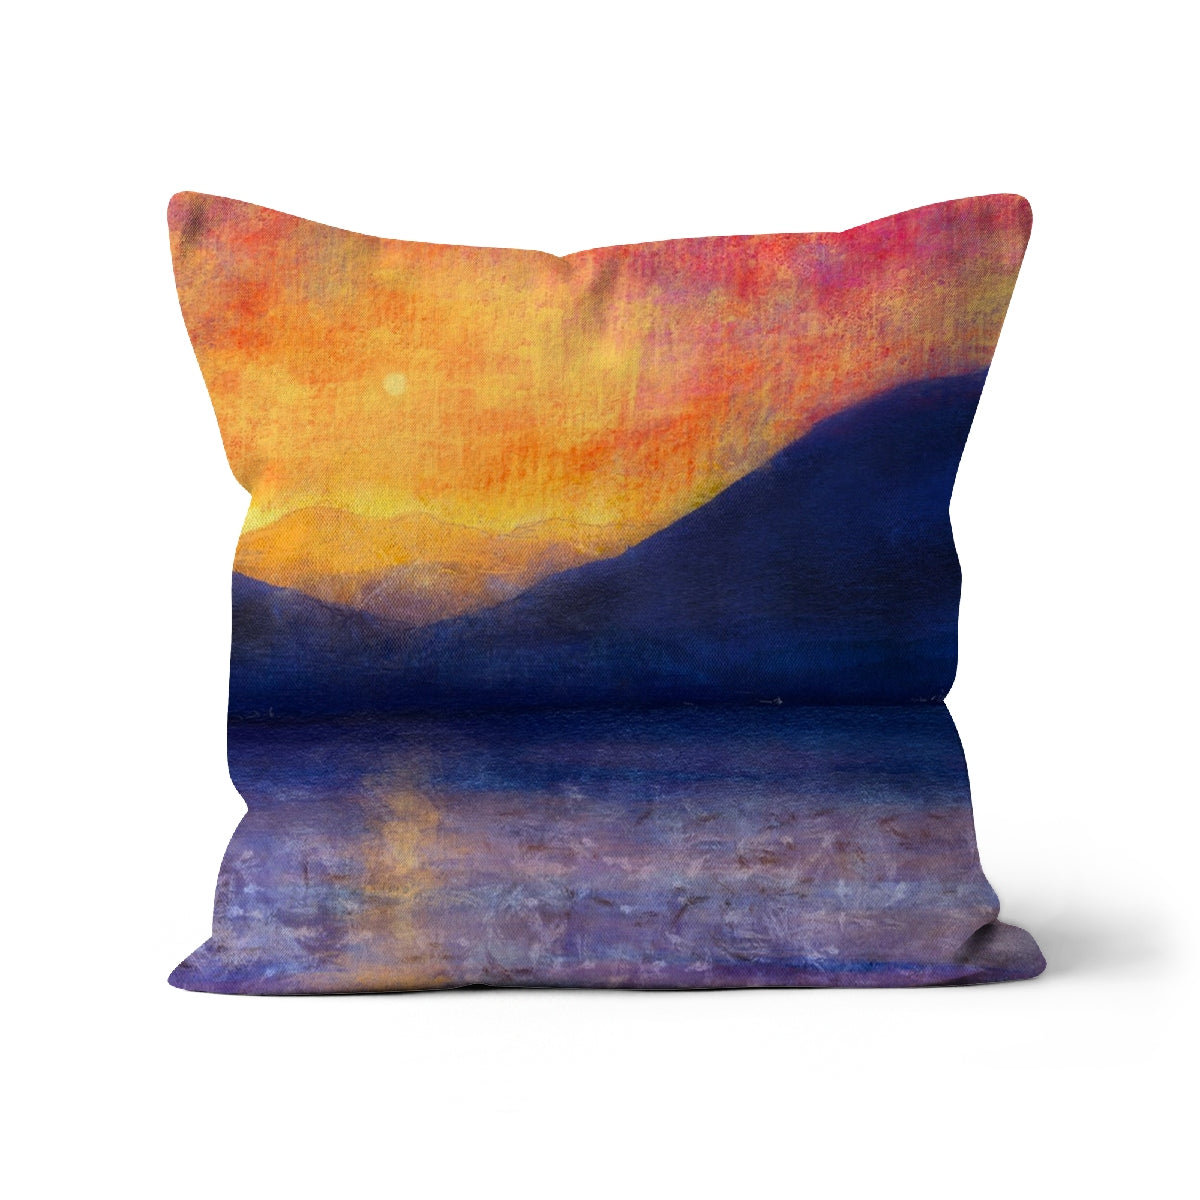 Sunset Approaching Mull Art Gifts Cushion-Cushions-Hebridean Islands Art Gallery-Canvas-22"x22"-Paintings, Prints, Homeware, Art Gifts From Scotland By Scottish Artist Kevin Hunter